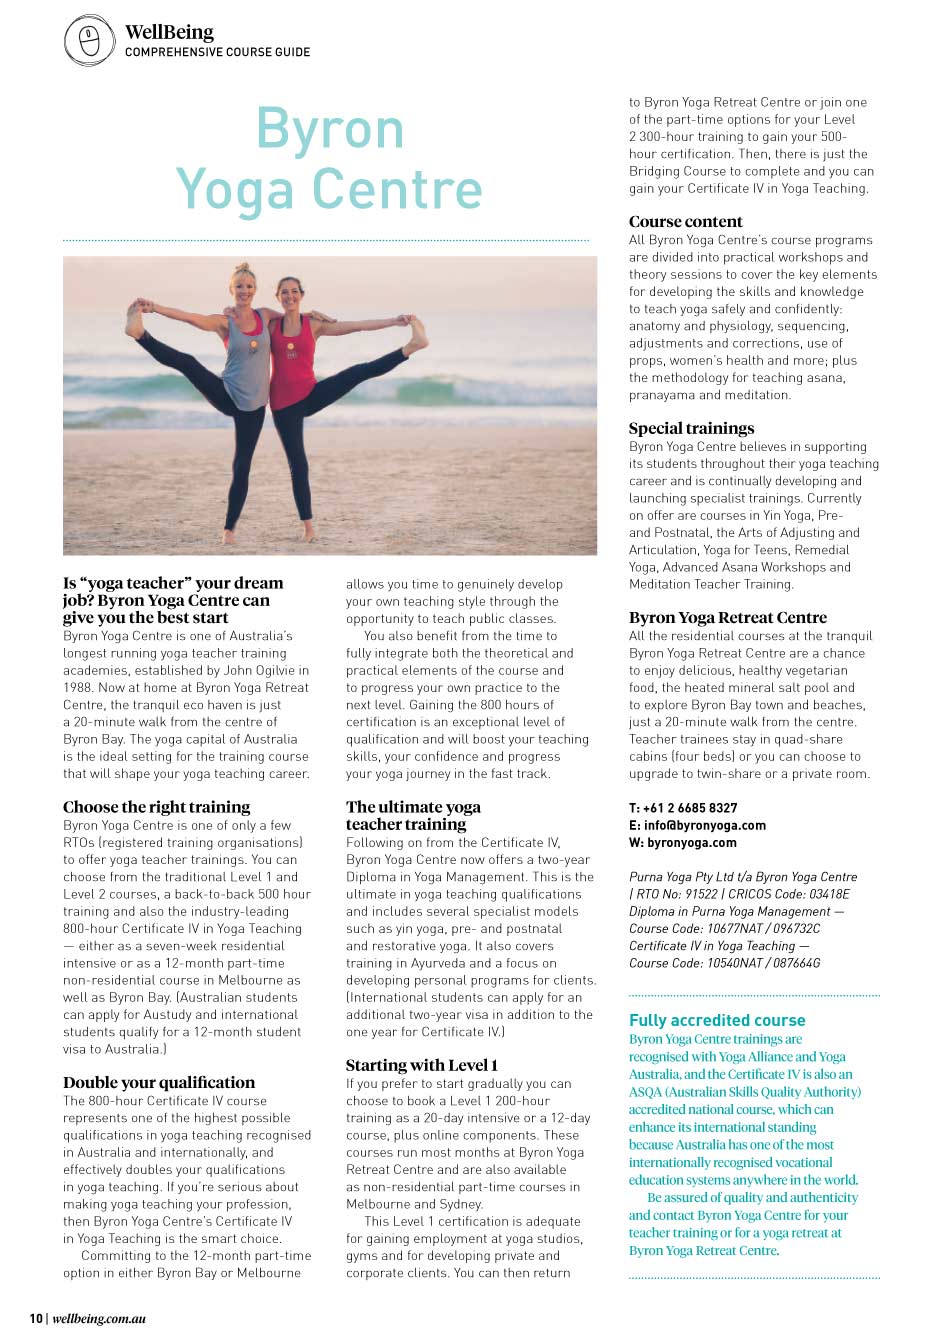 Wellbeing Magazine - Course Guide - Byron Yoga